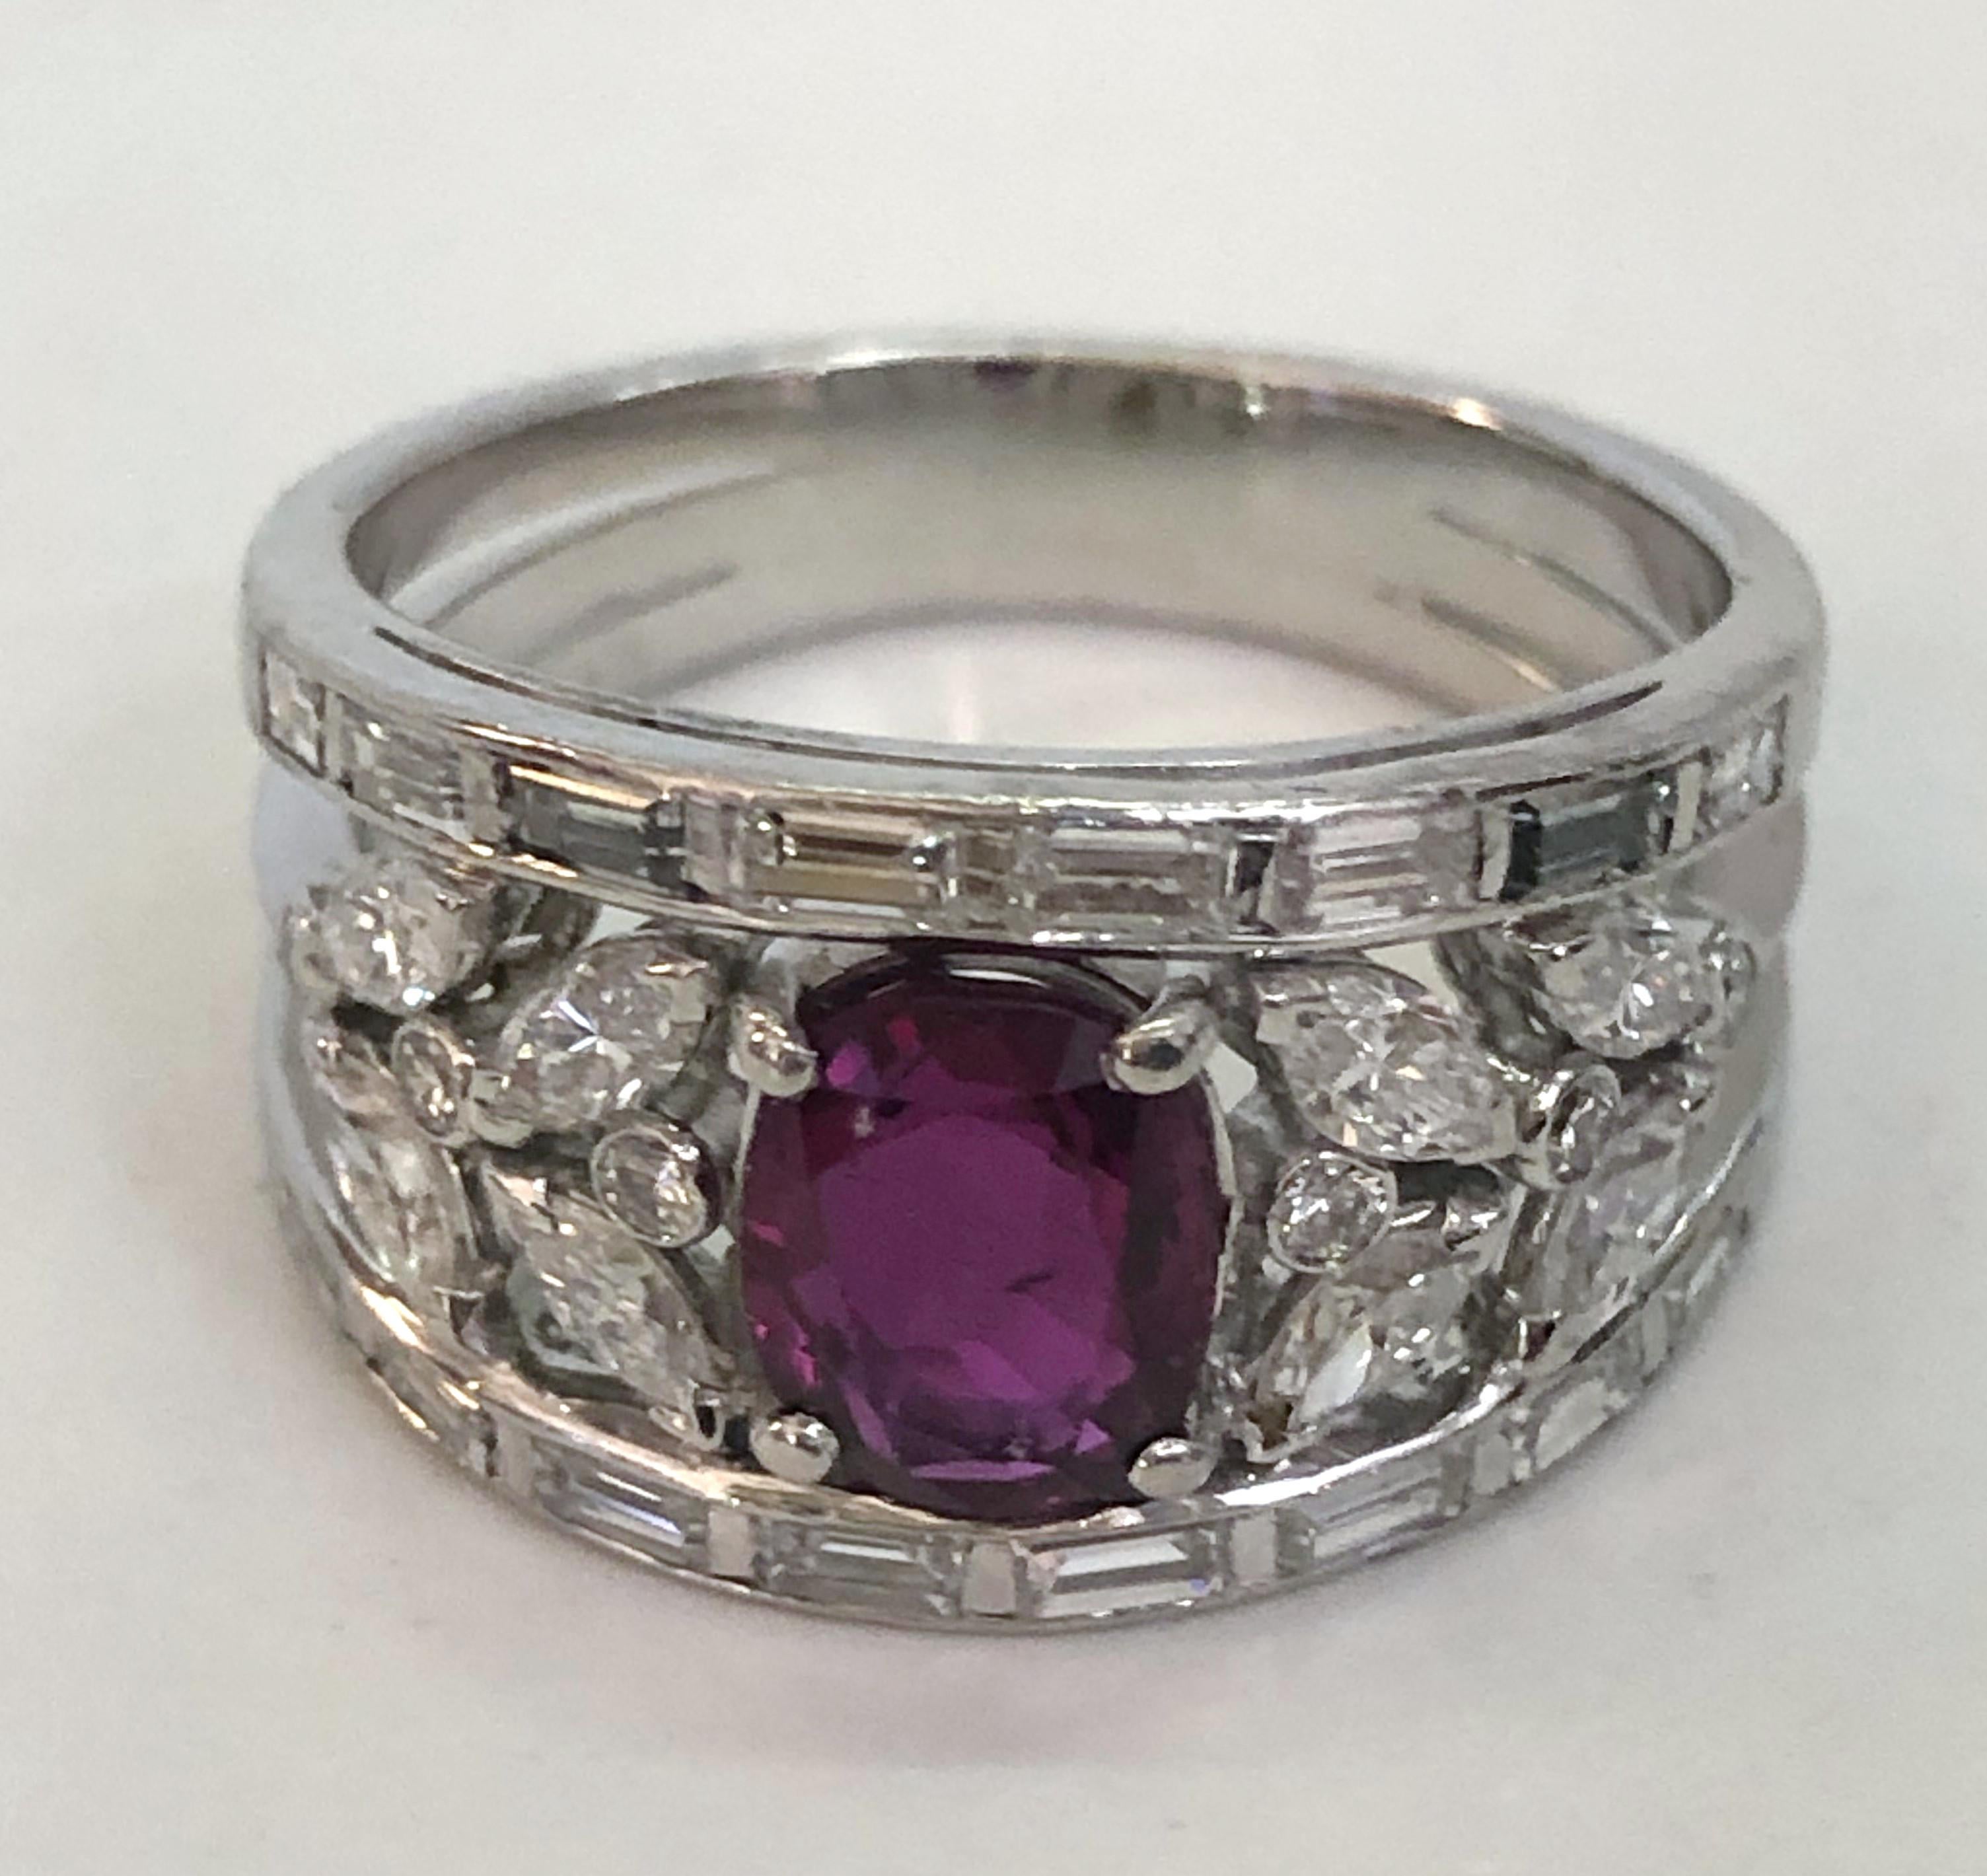 18 karat white gold band ring with a large central oval ruby of 1.2 karats and surrounding brilliant diamonds for a total of 1 karat in navel and baguette cut / Italy 1940s
Ring size US 7.5